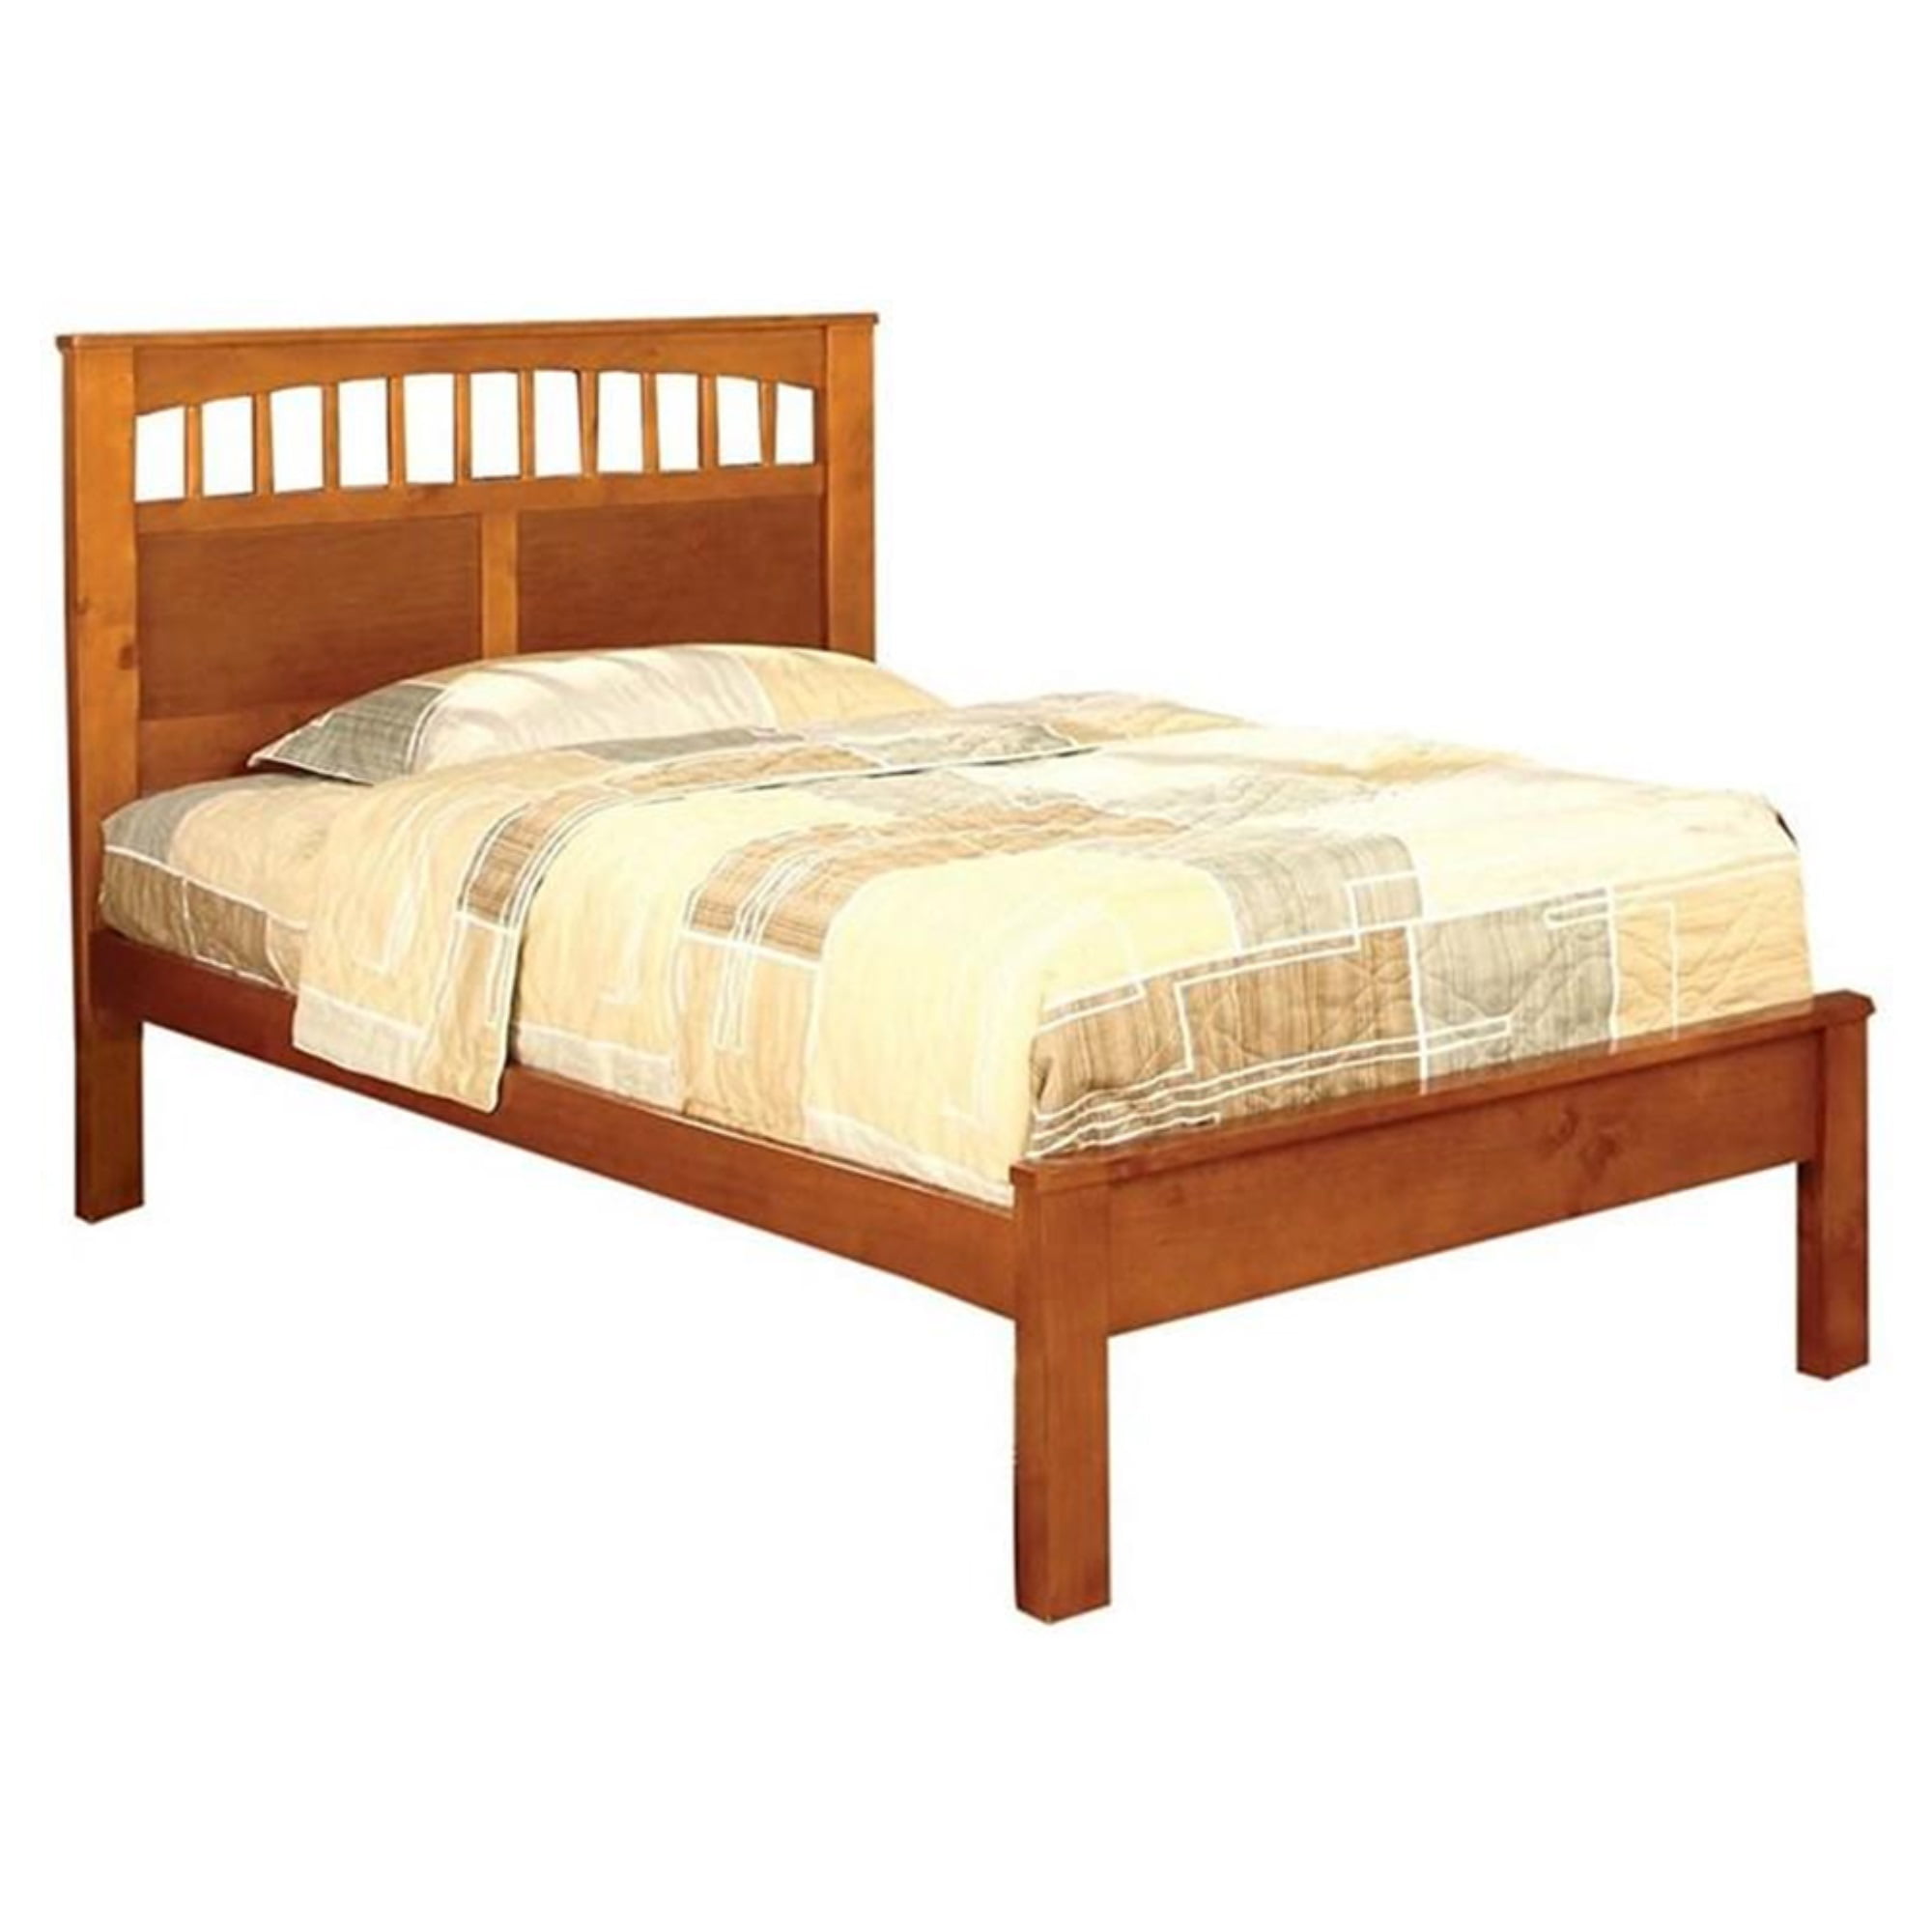 Transitional Twin Bed With Mission, Mission King Bed Frame With Headboard